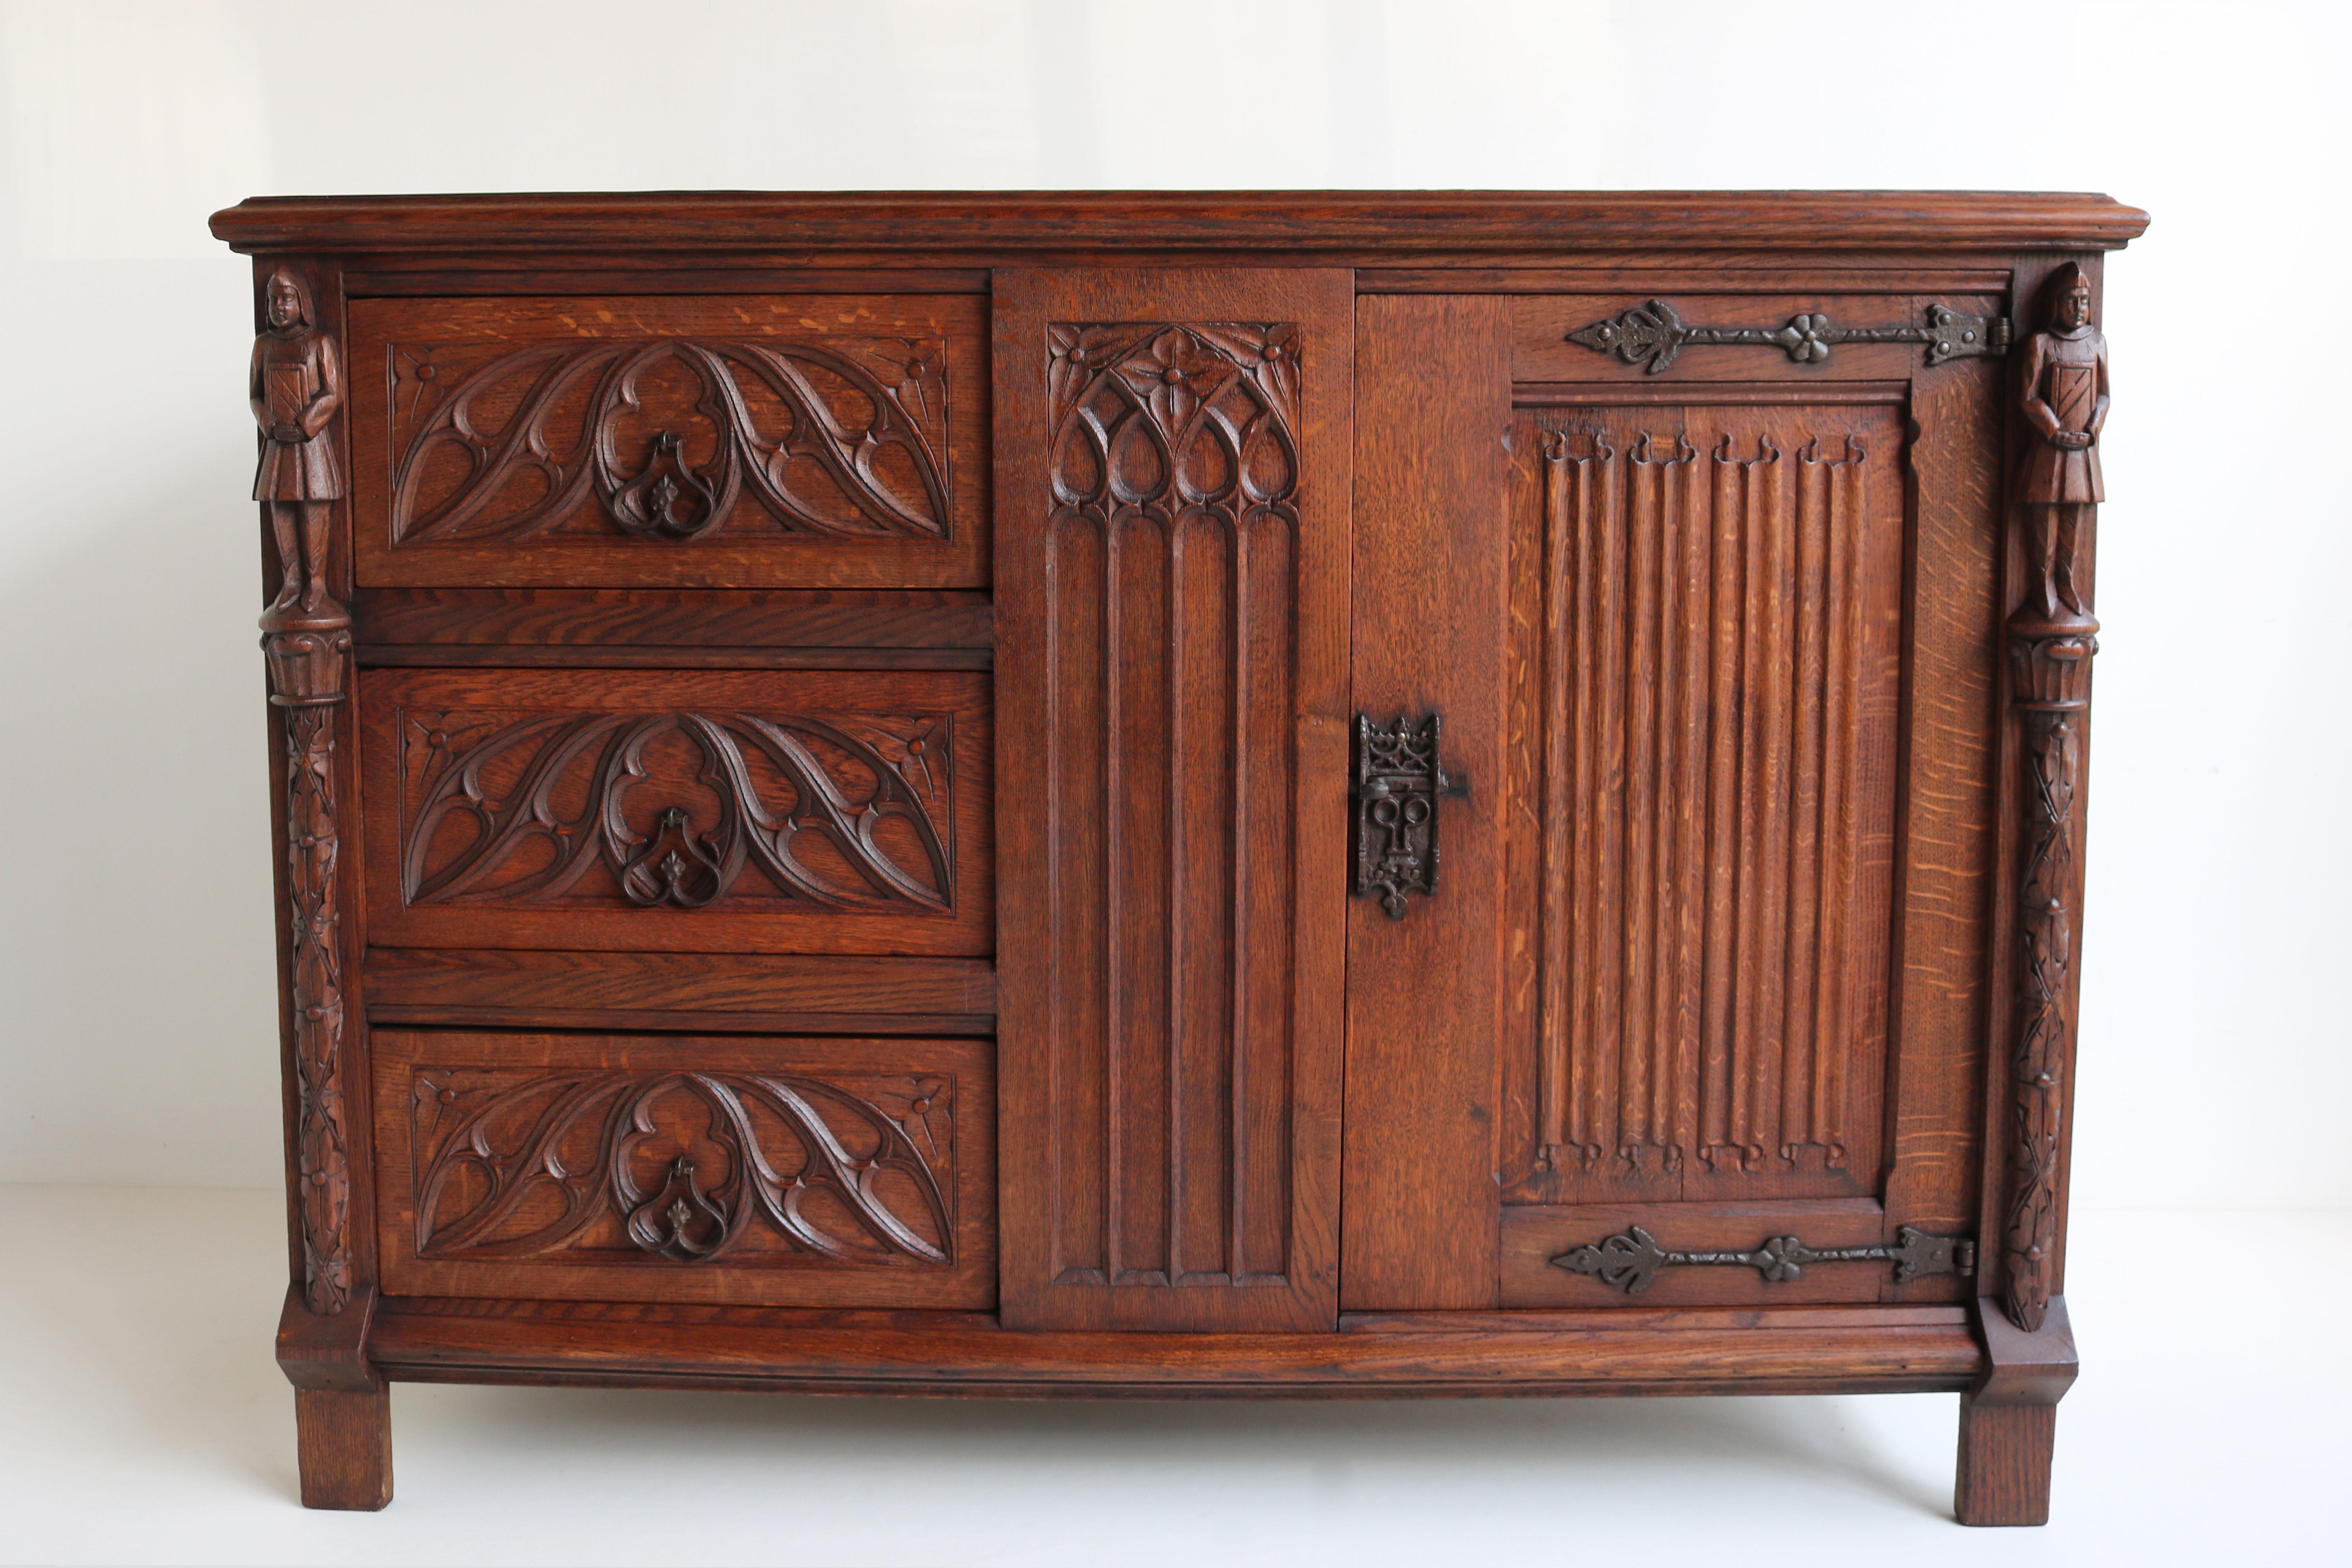 Gorgeous & practical ! This Antique French Gothic Revival Cabinet / Small credenza from the 1920s. 
Made out of hand carved European oak, with marvelous gothic details such as Knights & Cathedral arches. 
Great sturdy quality piece, with plenty of